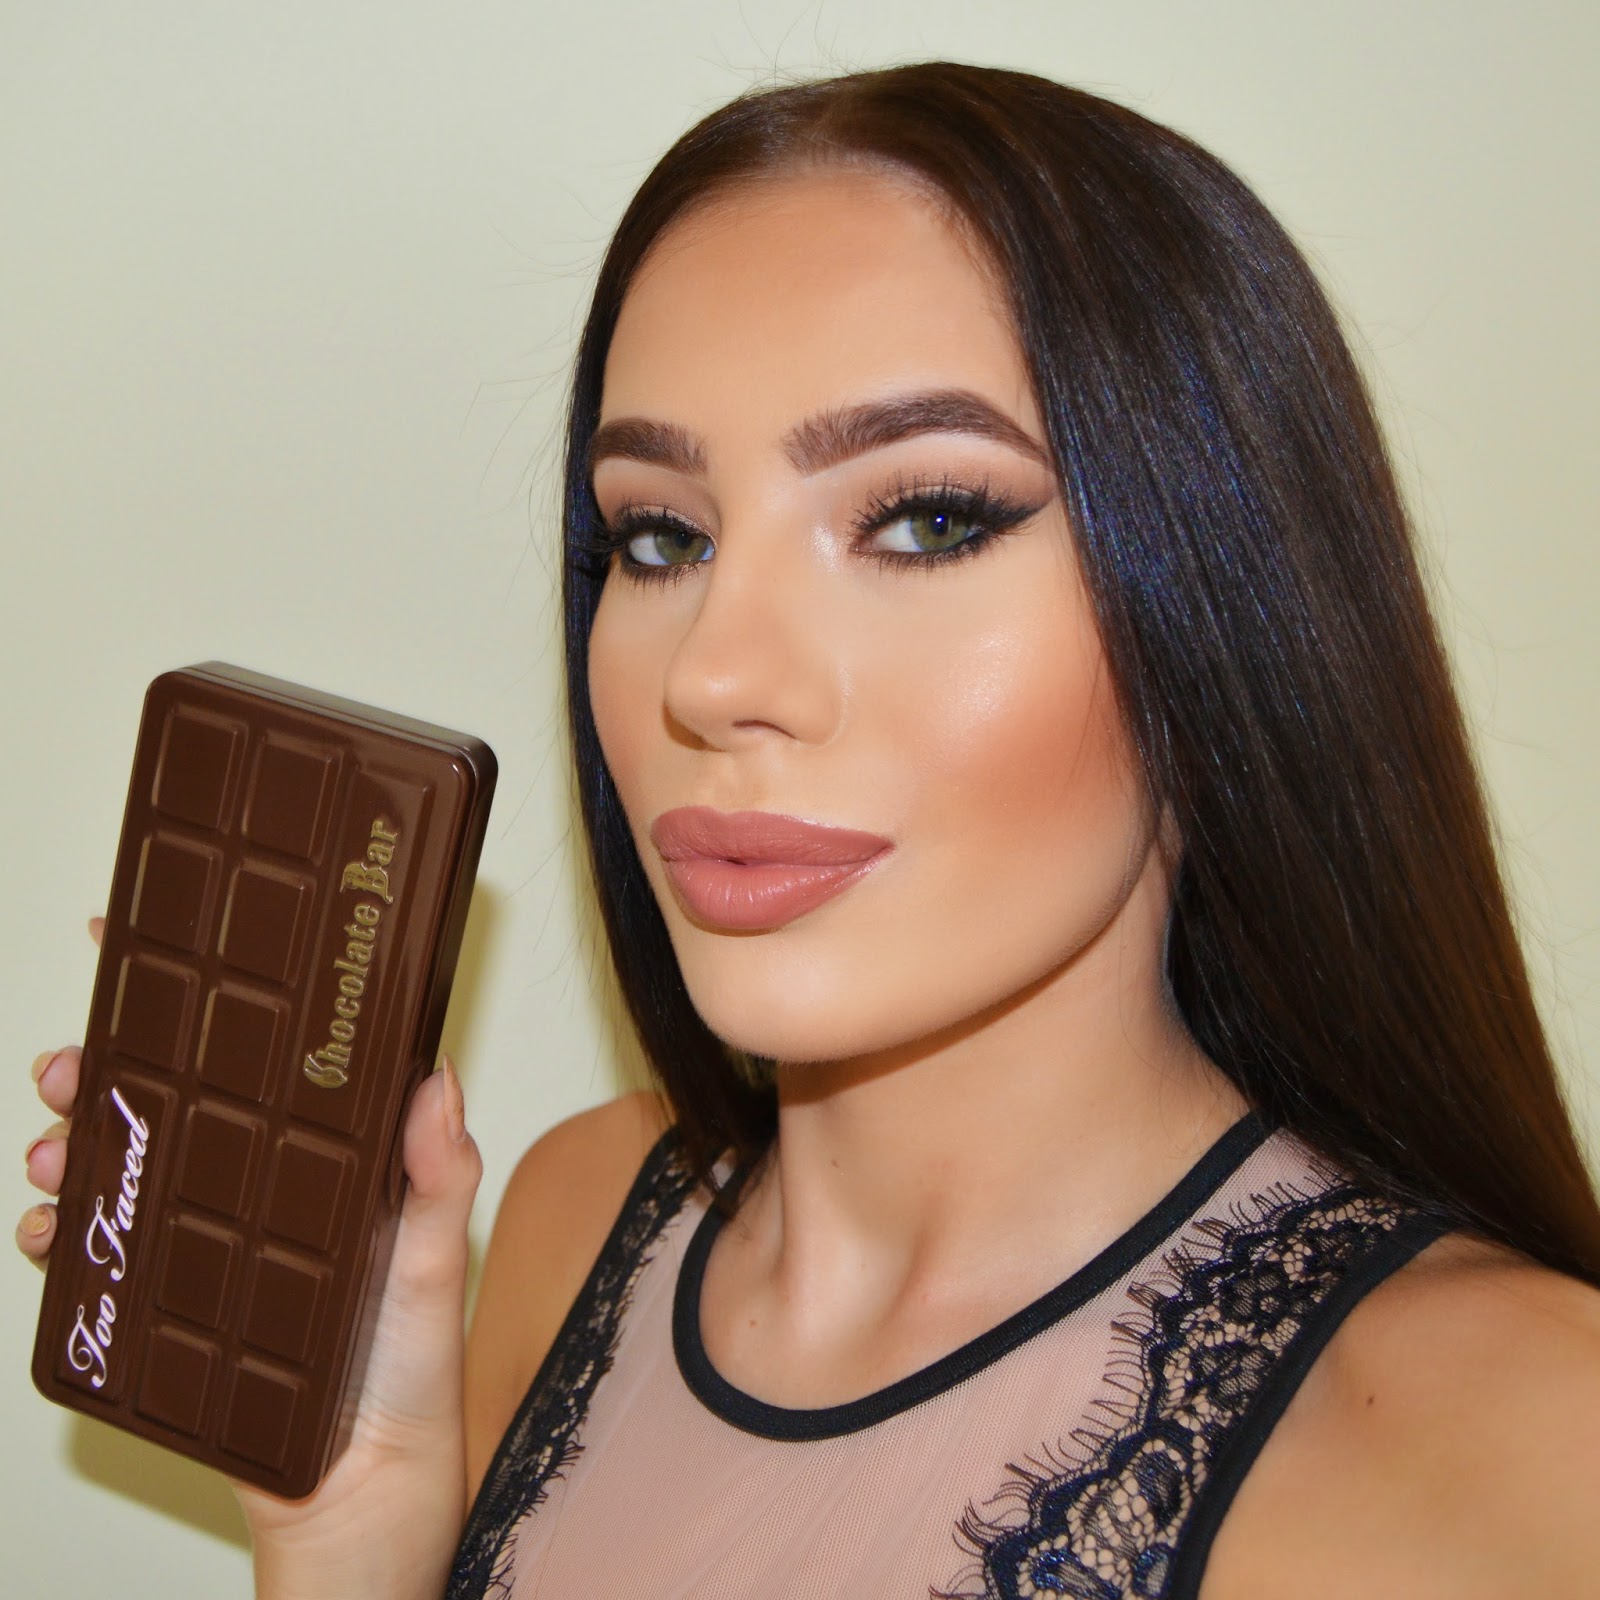 A person wearing makeup using the Too Faced Chocolate Bar Pallete